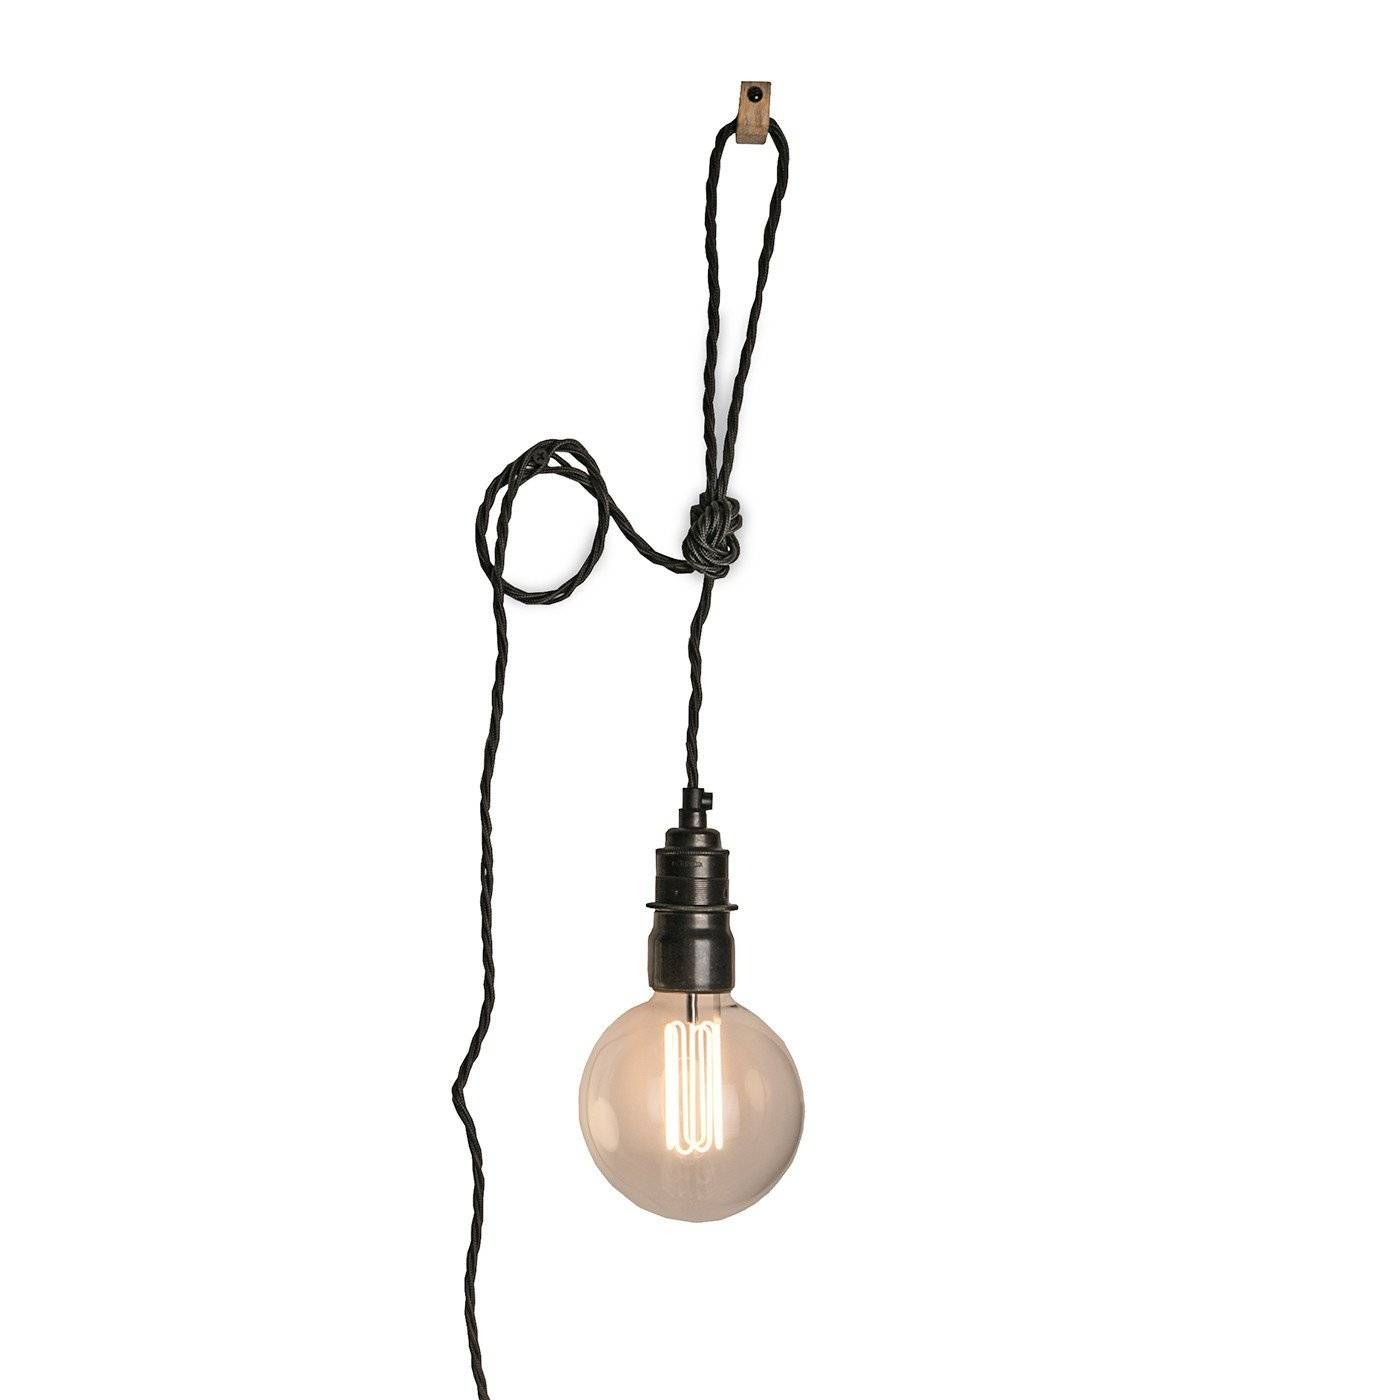 Heal's Plug In Hanging Pendant Pertaining To Plug In Hanging Pendant Lights (View 11 of 15)